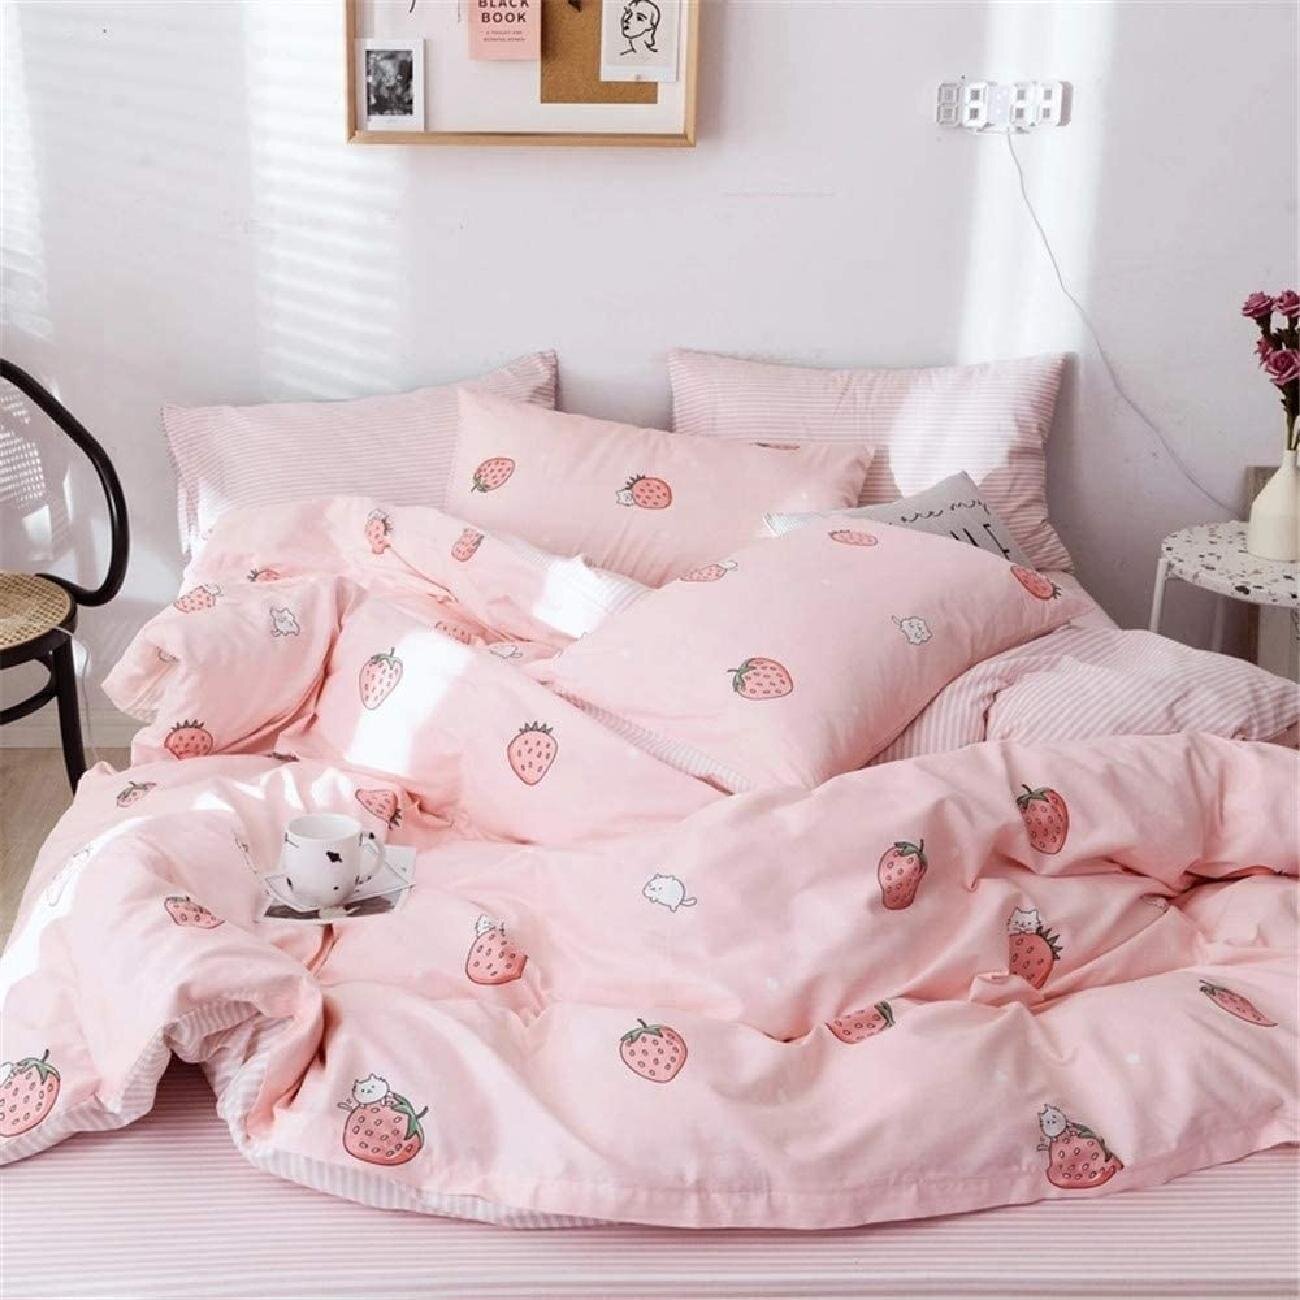 Girls Duvet Cover Twin Size,Strawberry Fruit Duvet Cover Set,Soft Cotton  Pink Striped Bedding Set For Teen Girls Lovely Home Bedding Collection